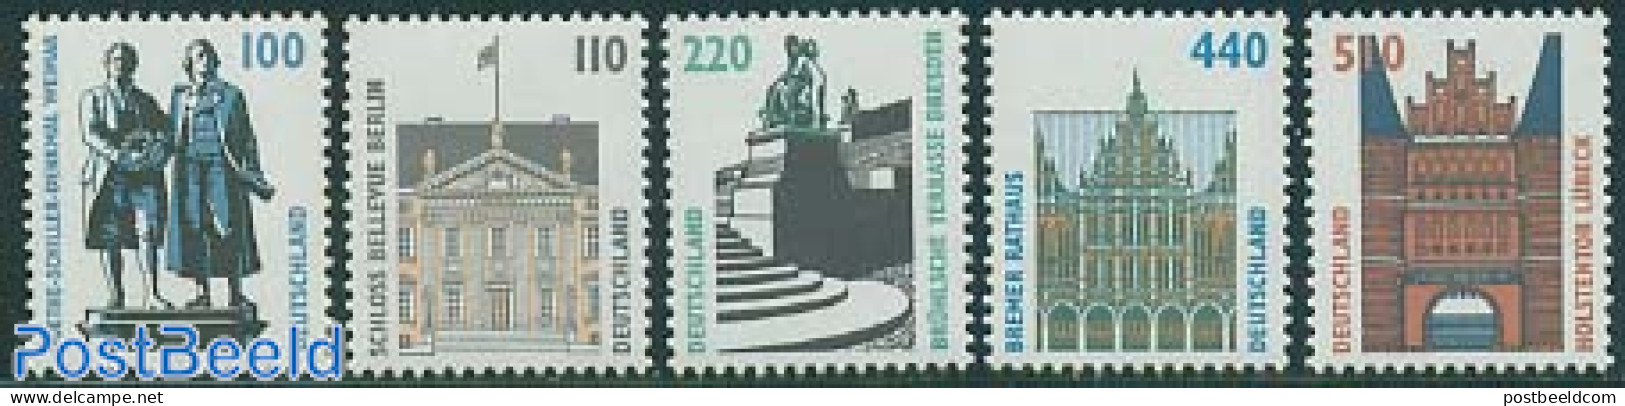 Germany, Federal Republic 1997 Definitives 5v, Mint NH, Art - Castles & Fortifications - Sculpture - Unused Stamps